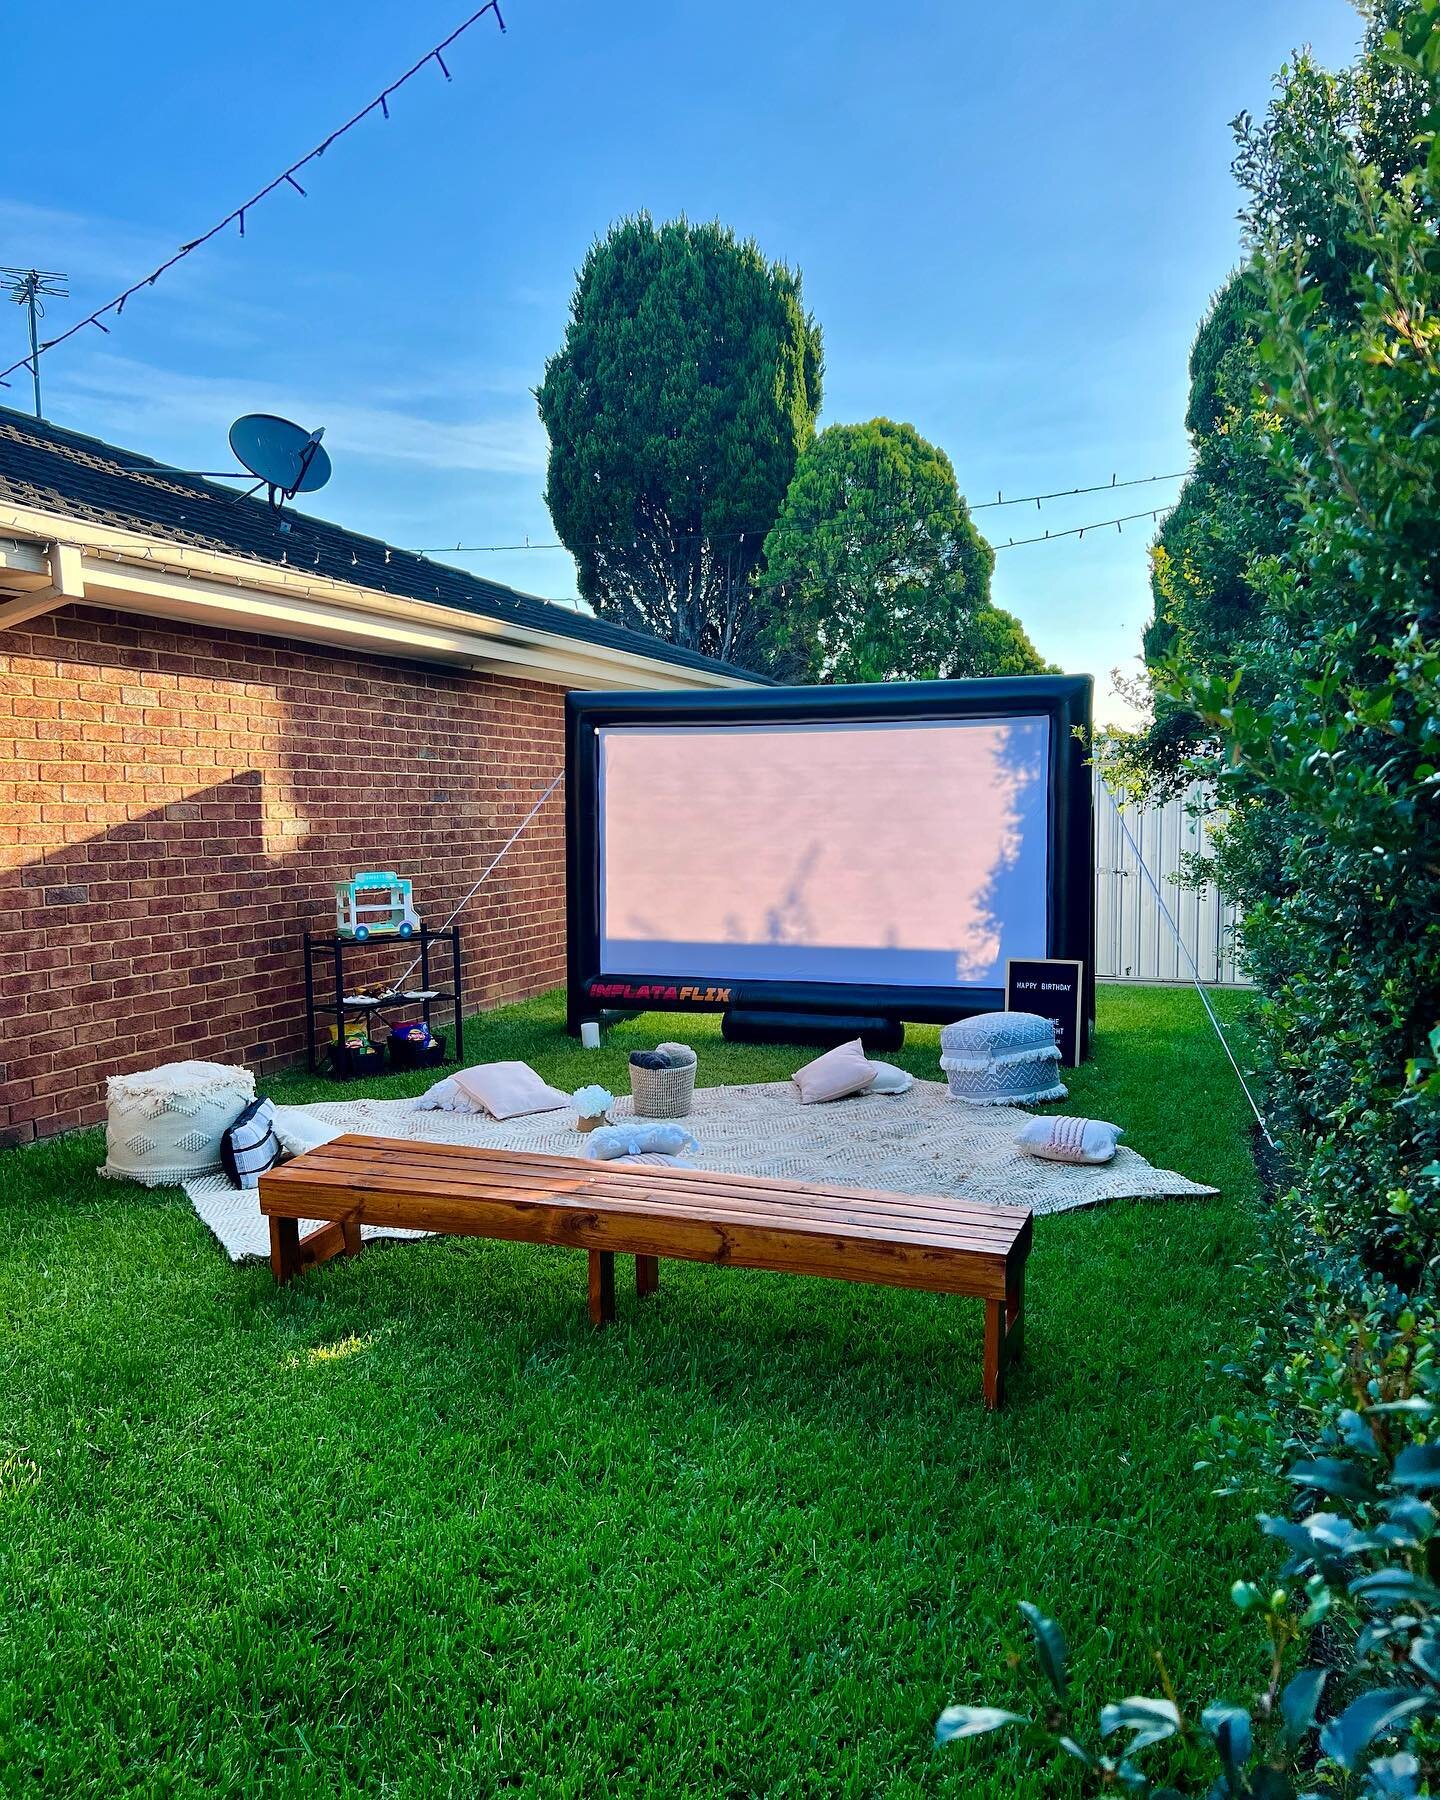 Who needs a movie theater when you can have a picnic and a movie right in your backyard? 🎉🎥 

Our inflatable movie screen is the ultimate birthday party entertainment! 

#Inflataflix #BackyardCinema #OutdoorCinema #MovieNights #PicnicParty